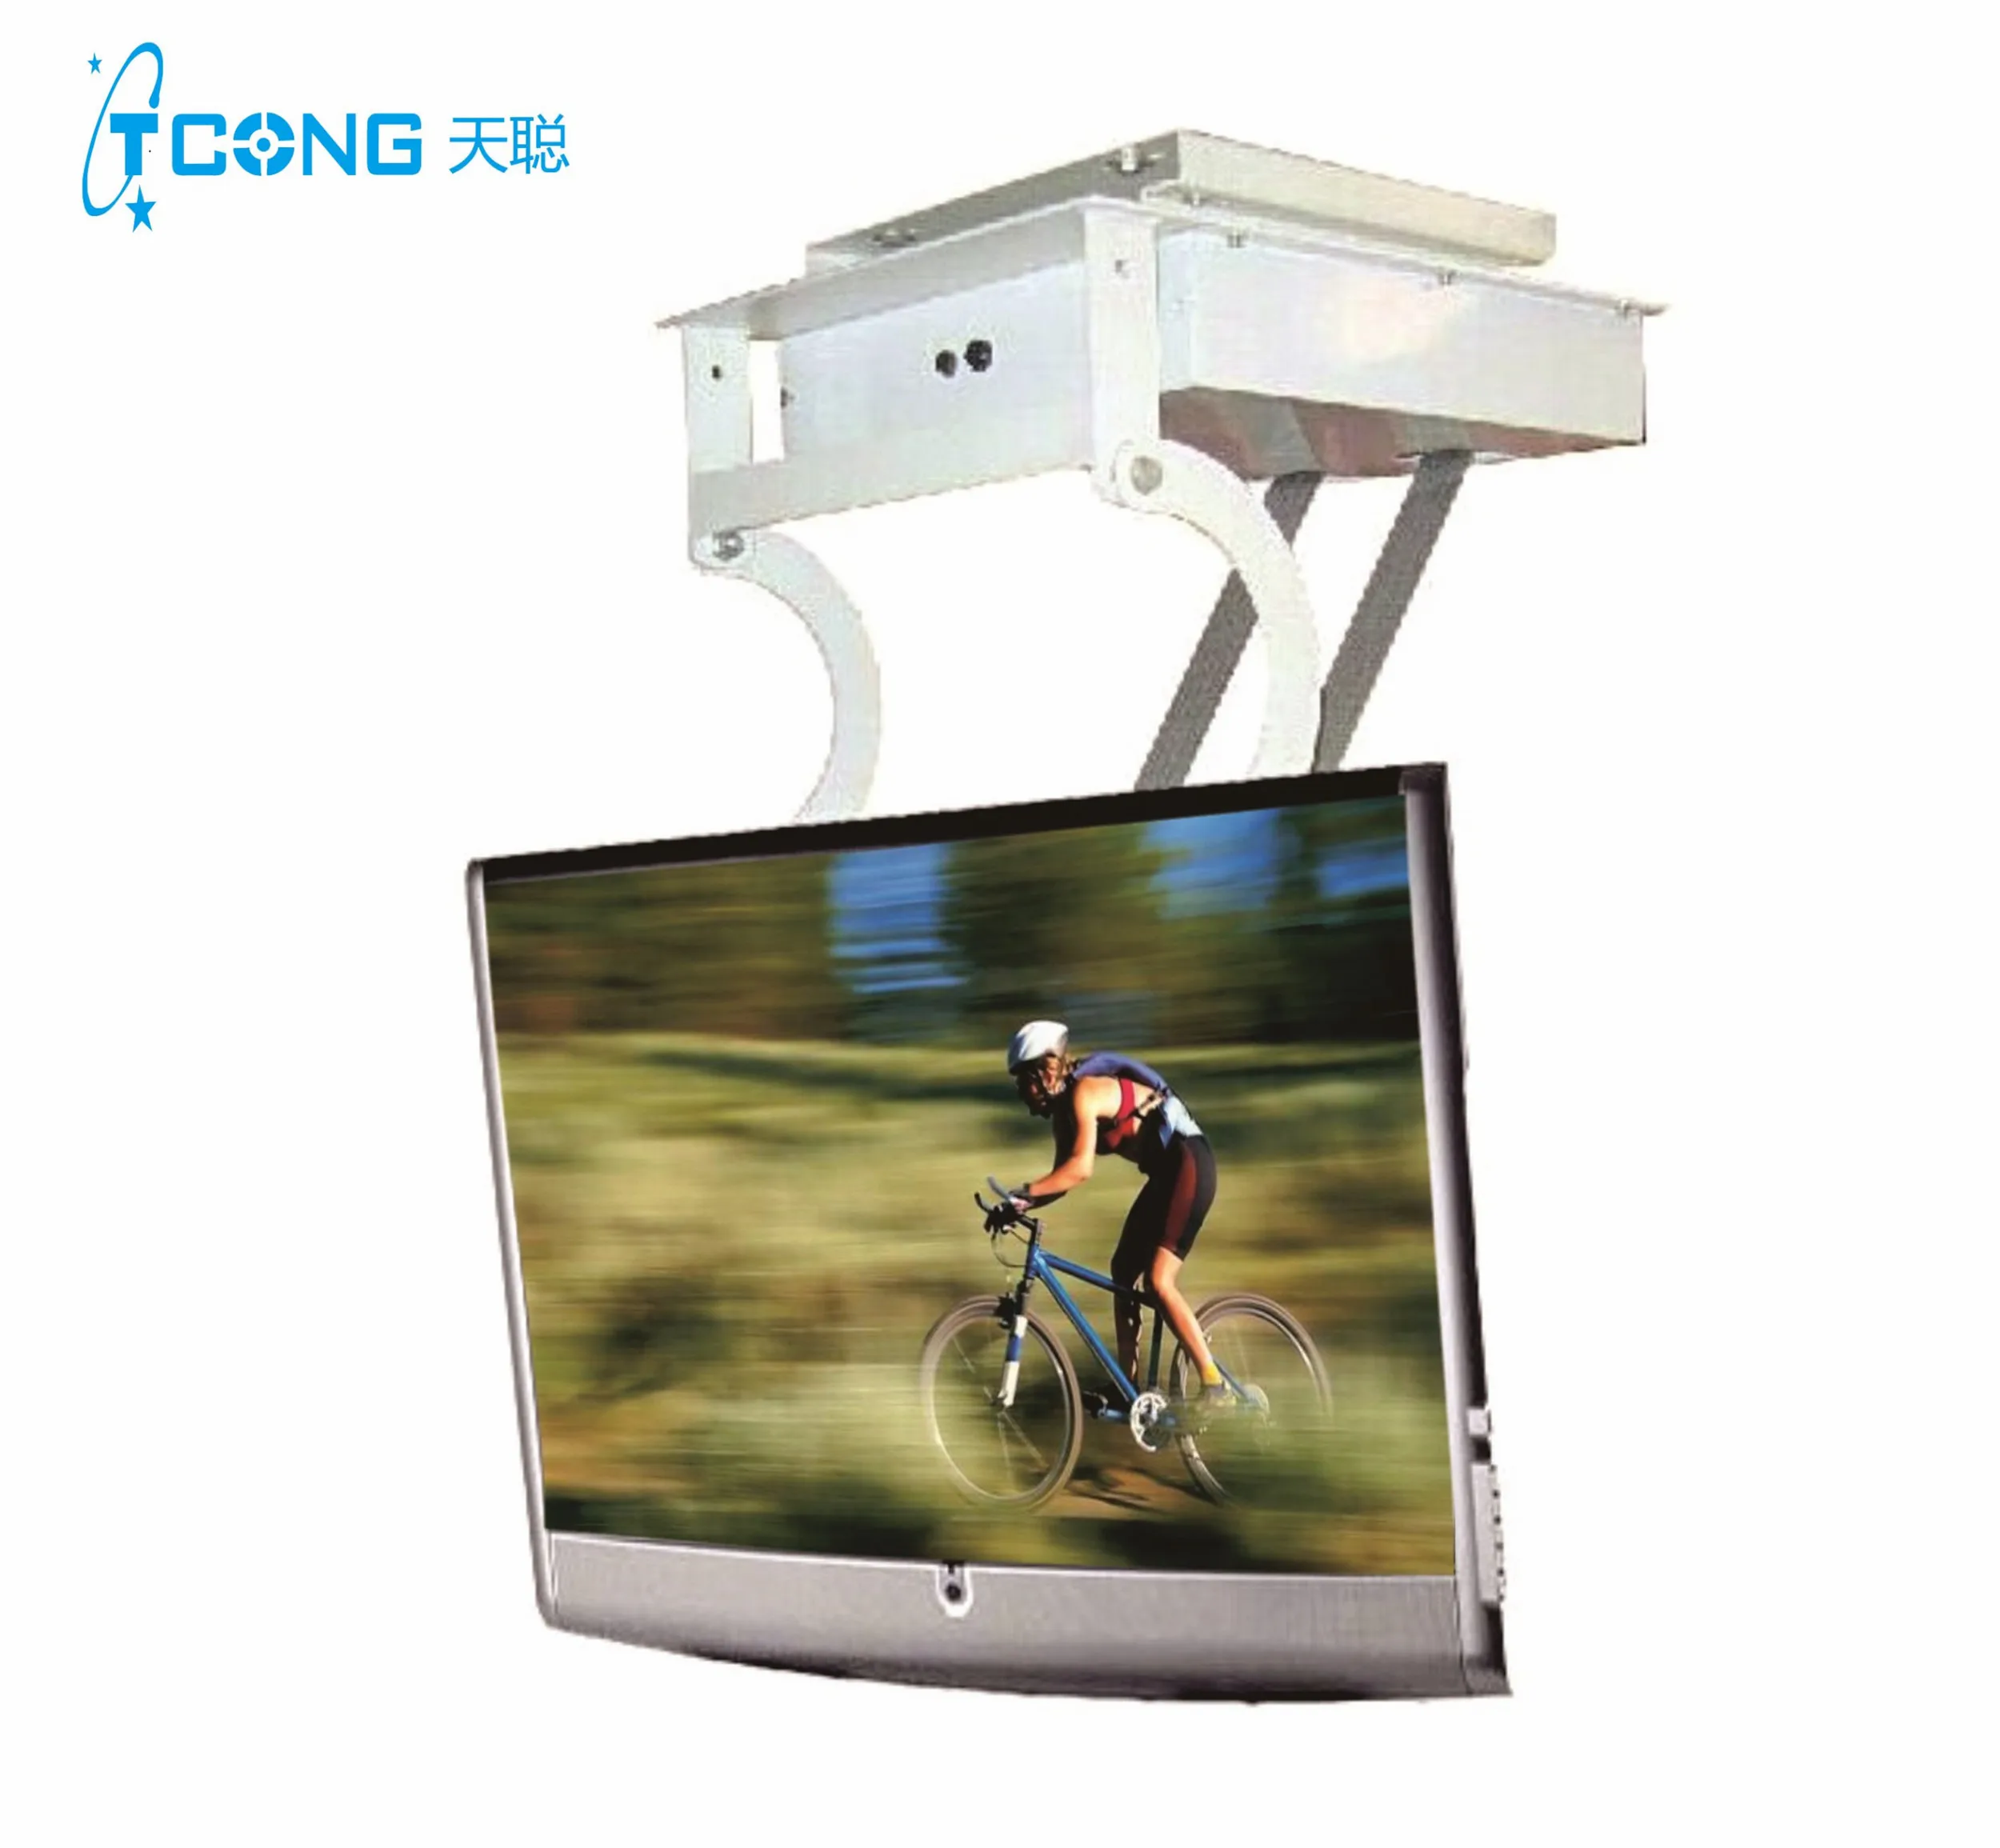 

32-75" TV Ceiling Mount 180 Degree Full Motion LCD LED TV Roof Mount Bracket Holder with Remote Control & APP Control